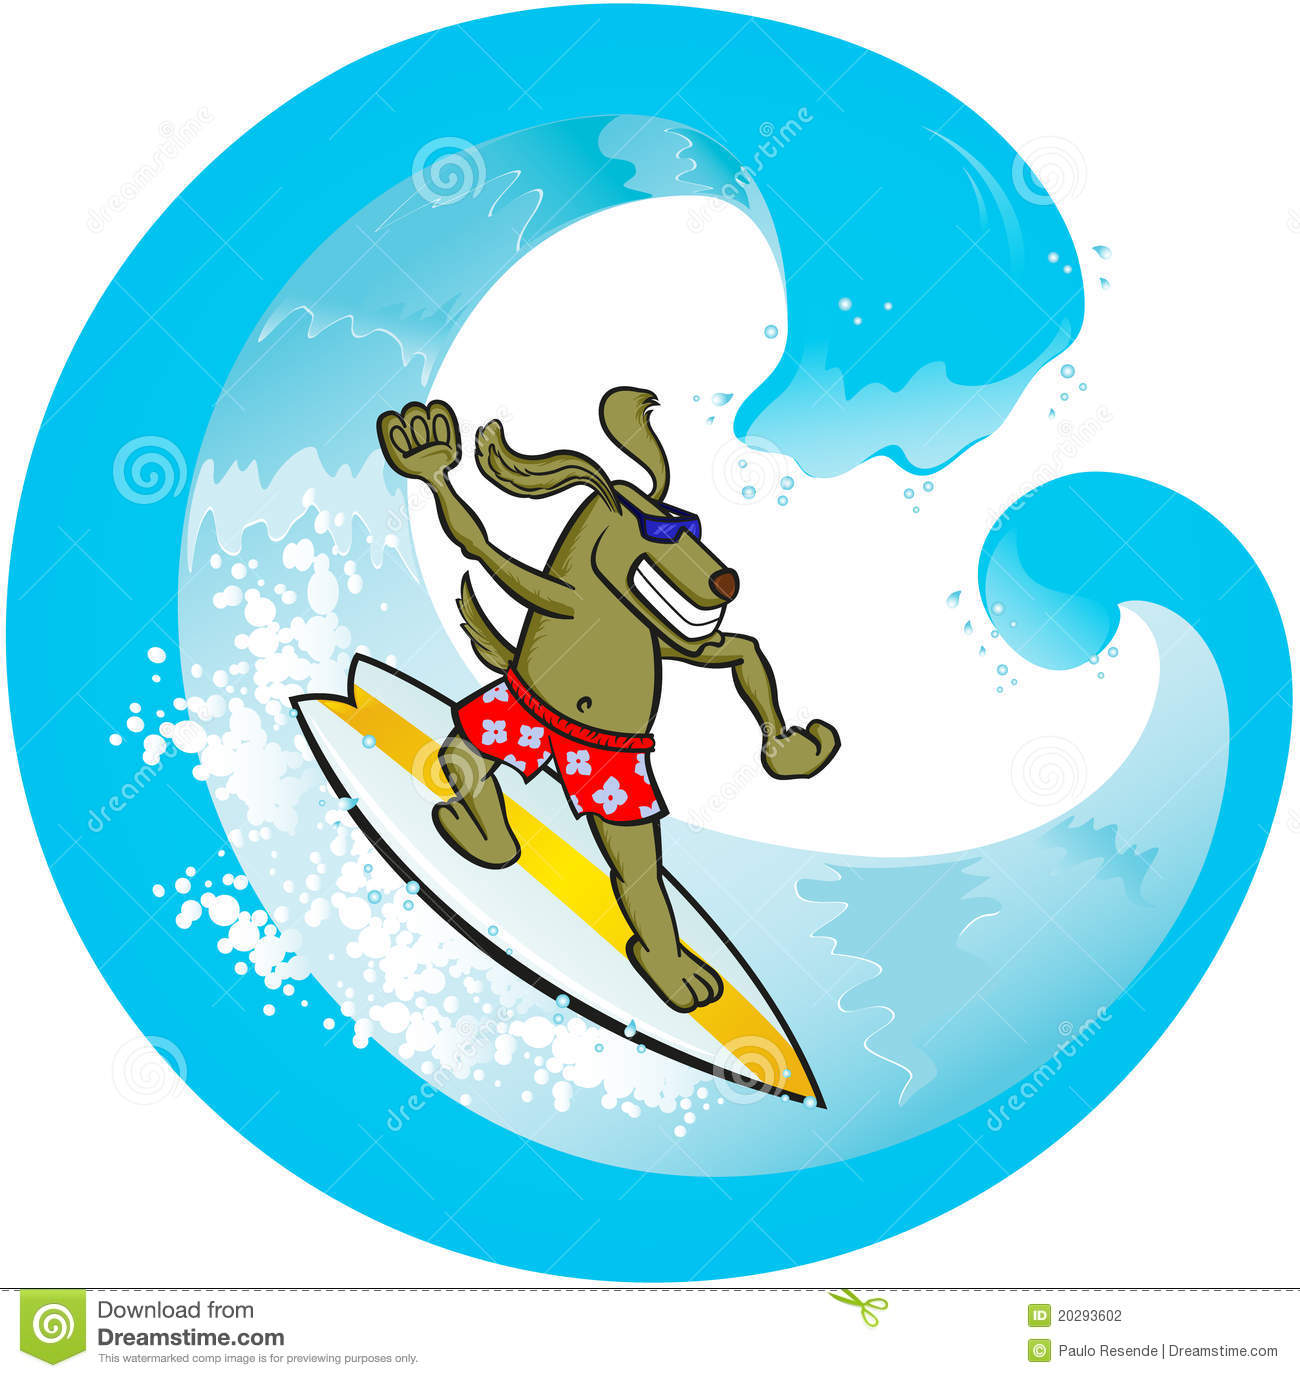 Vector Illustration Of A Dog Surfing The Wave